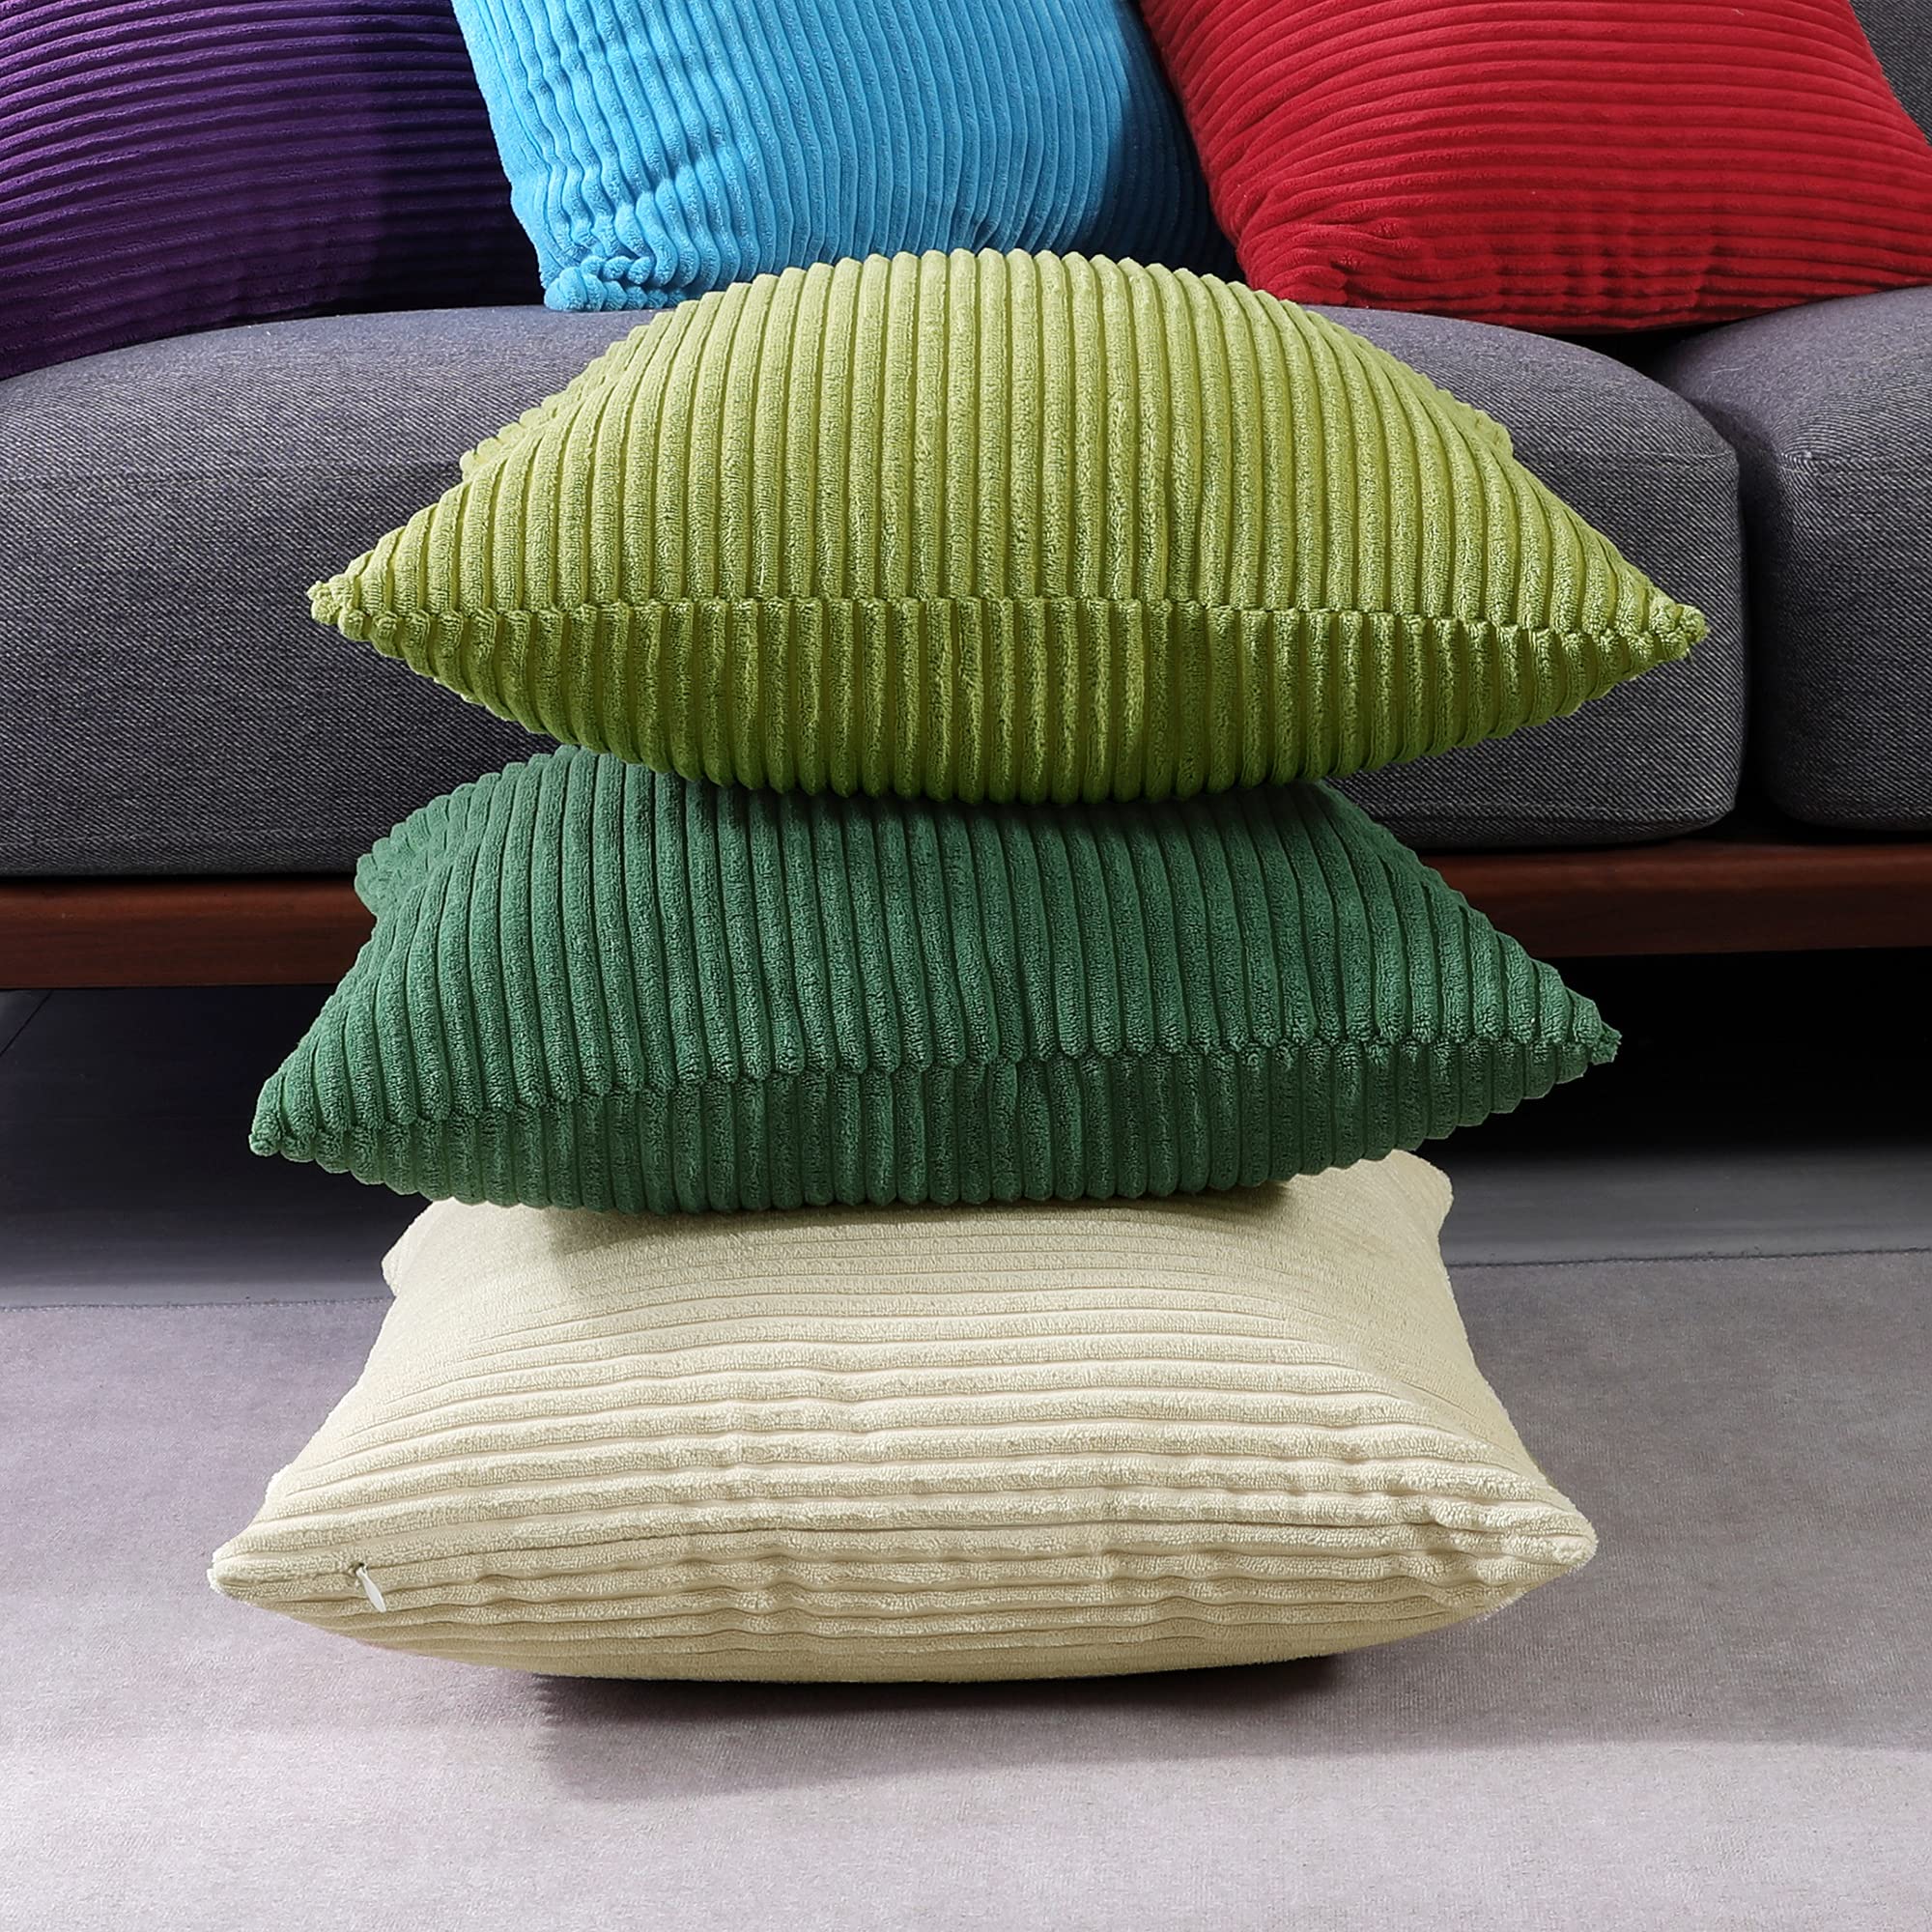 Deconovo Super Soft Set of 2 Corduroy Cushion Covers Square Throw Pillow Cases with Invisible Zipper, Striped Corduroy Cushion Cover